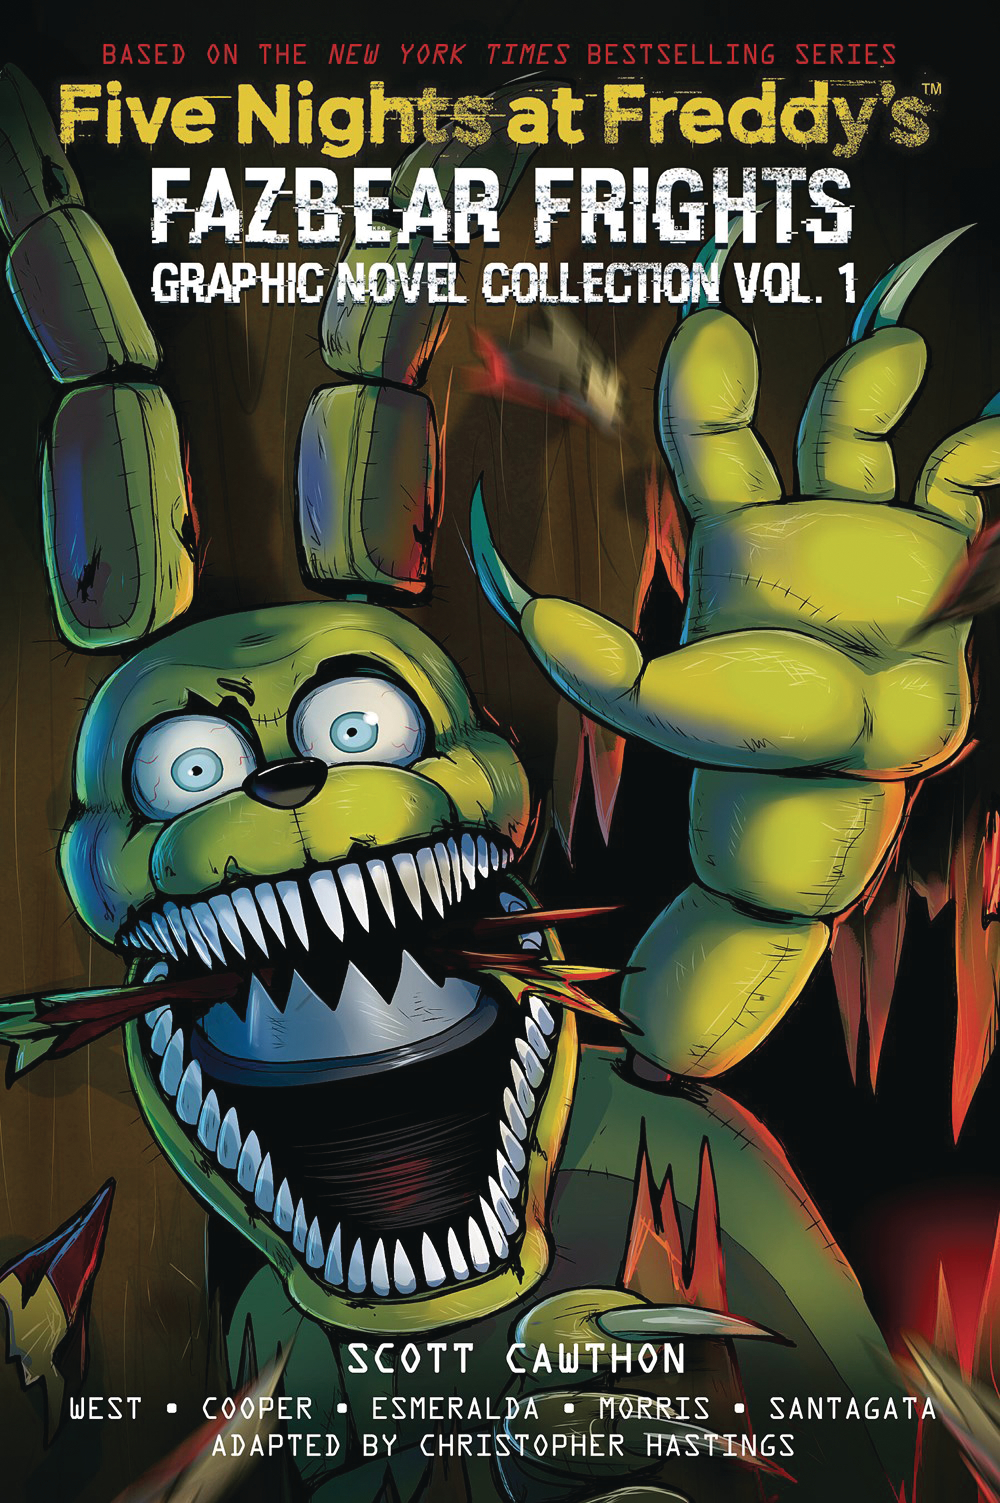 Five Nights At Freddys Graphic Novel Collected Volume 1 Fazbear Frights